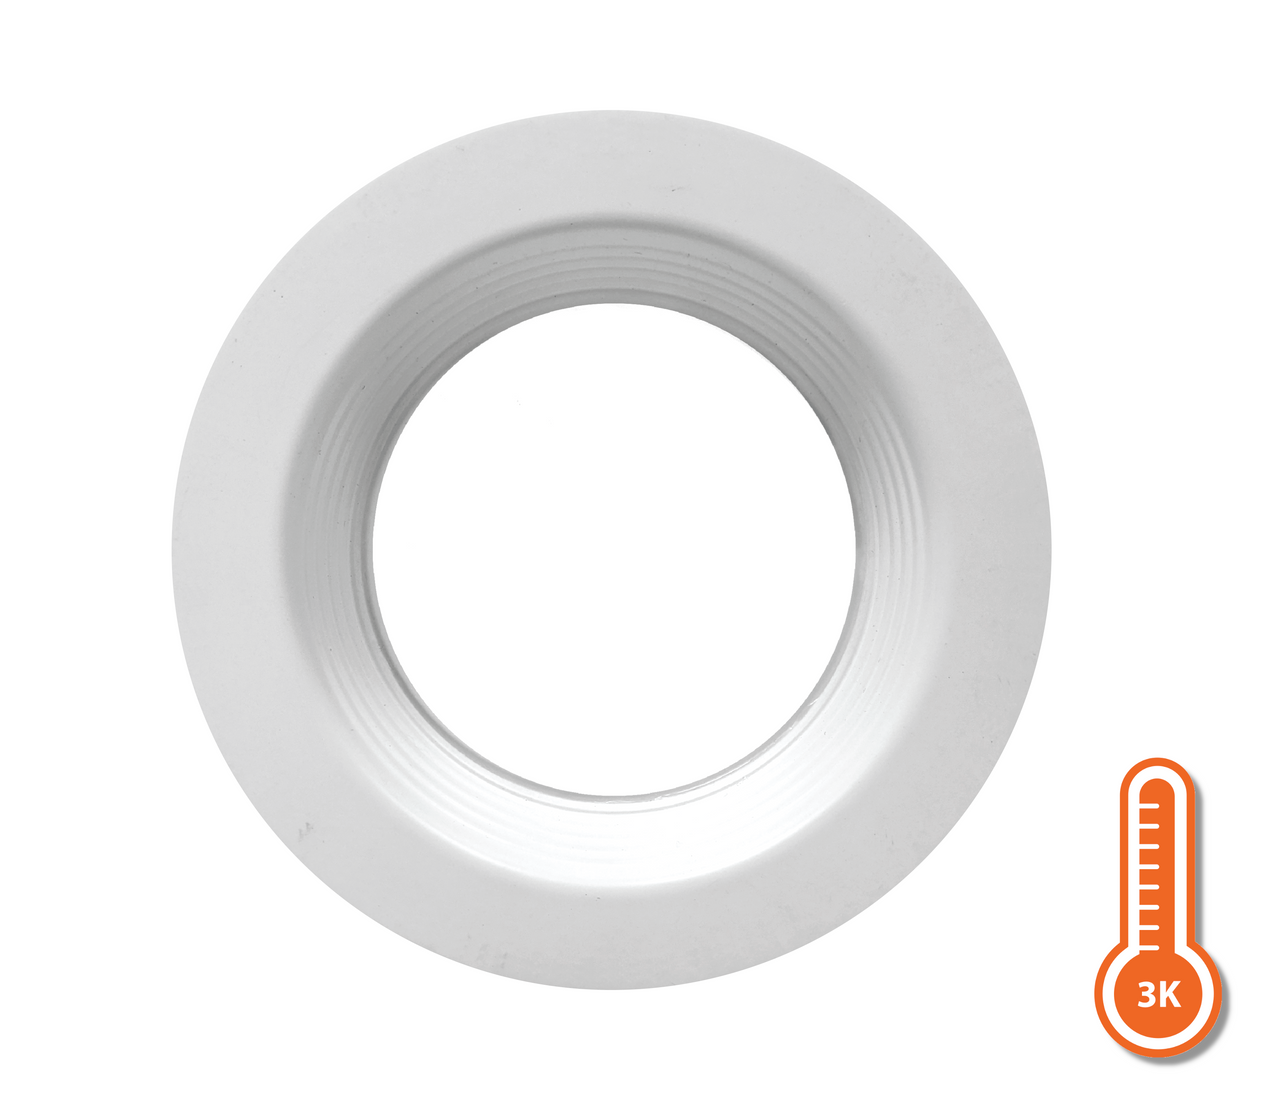 NICOR DLR46071203KWHBF-12P DLR4(v6) 4-inch White 3000K Recessed LED Downlight with Baffle (12 Pack)